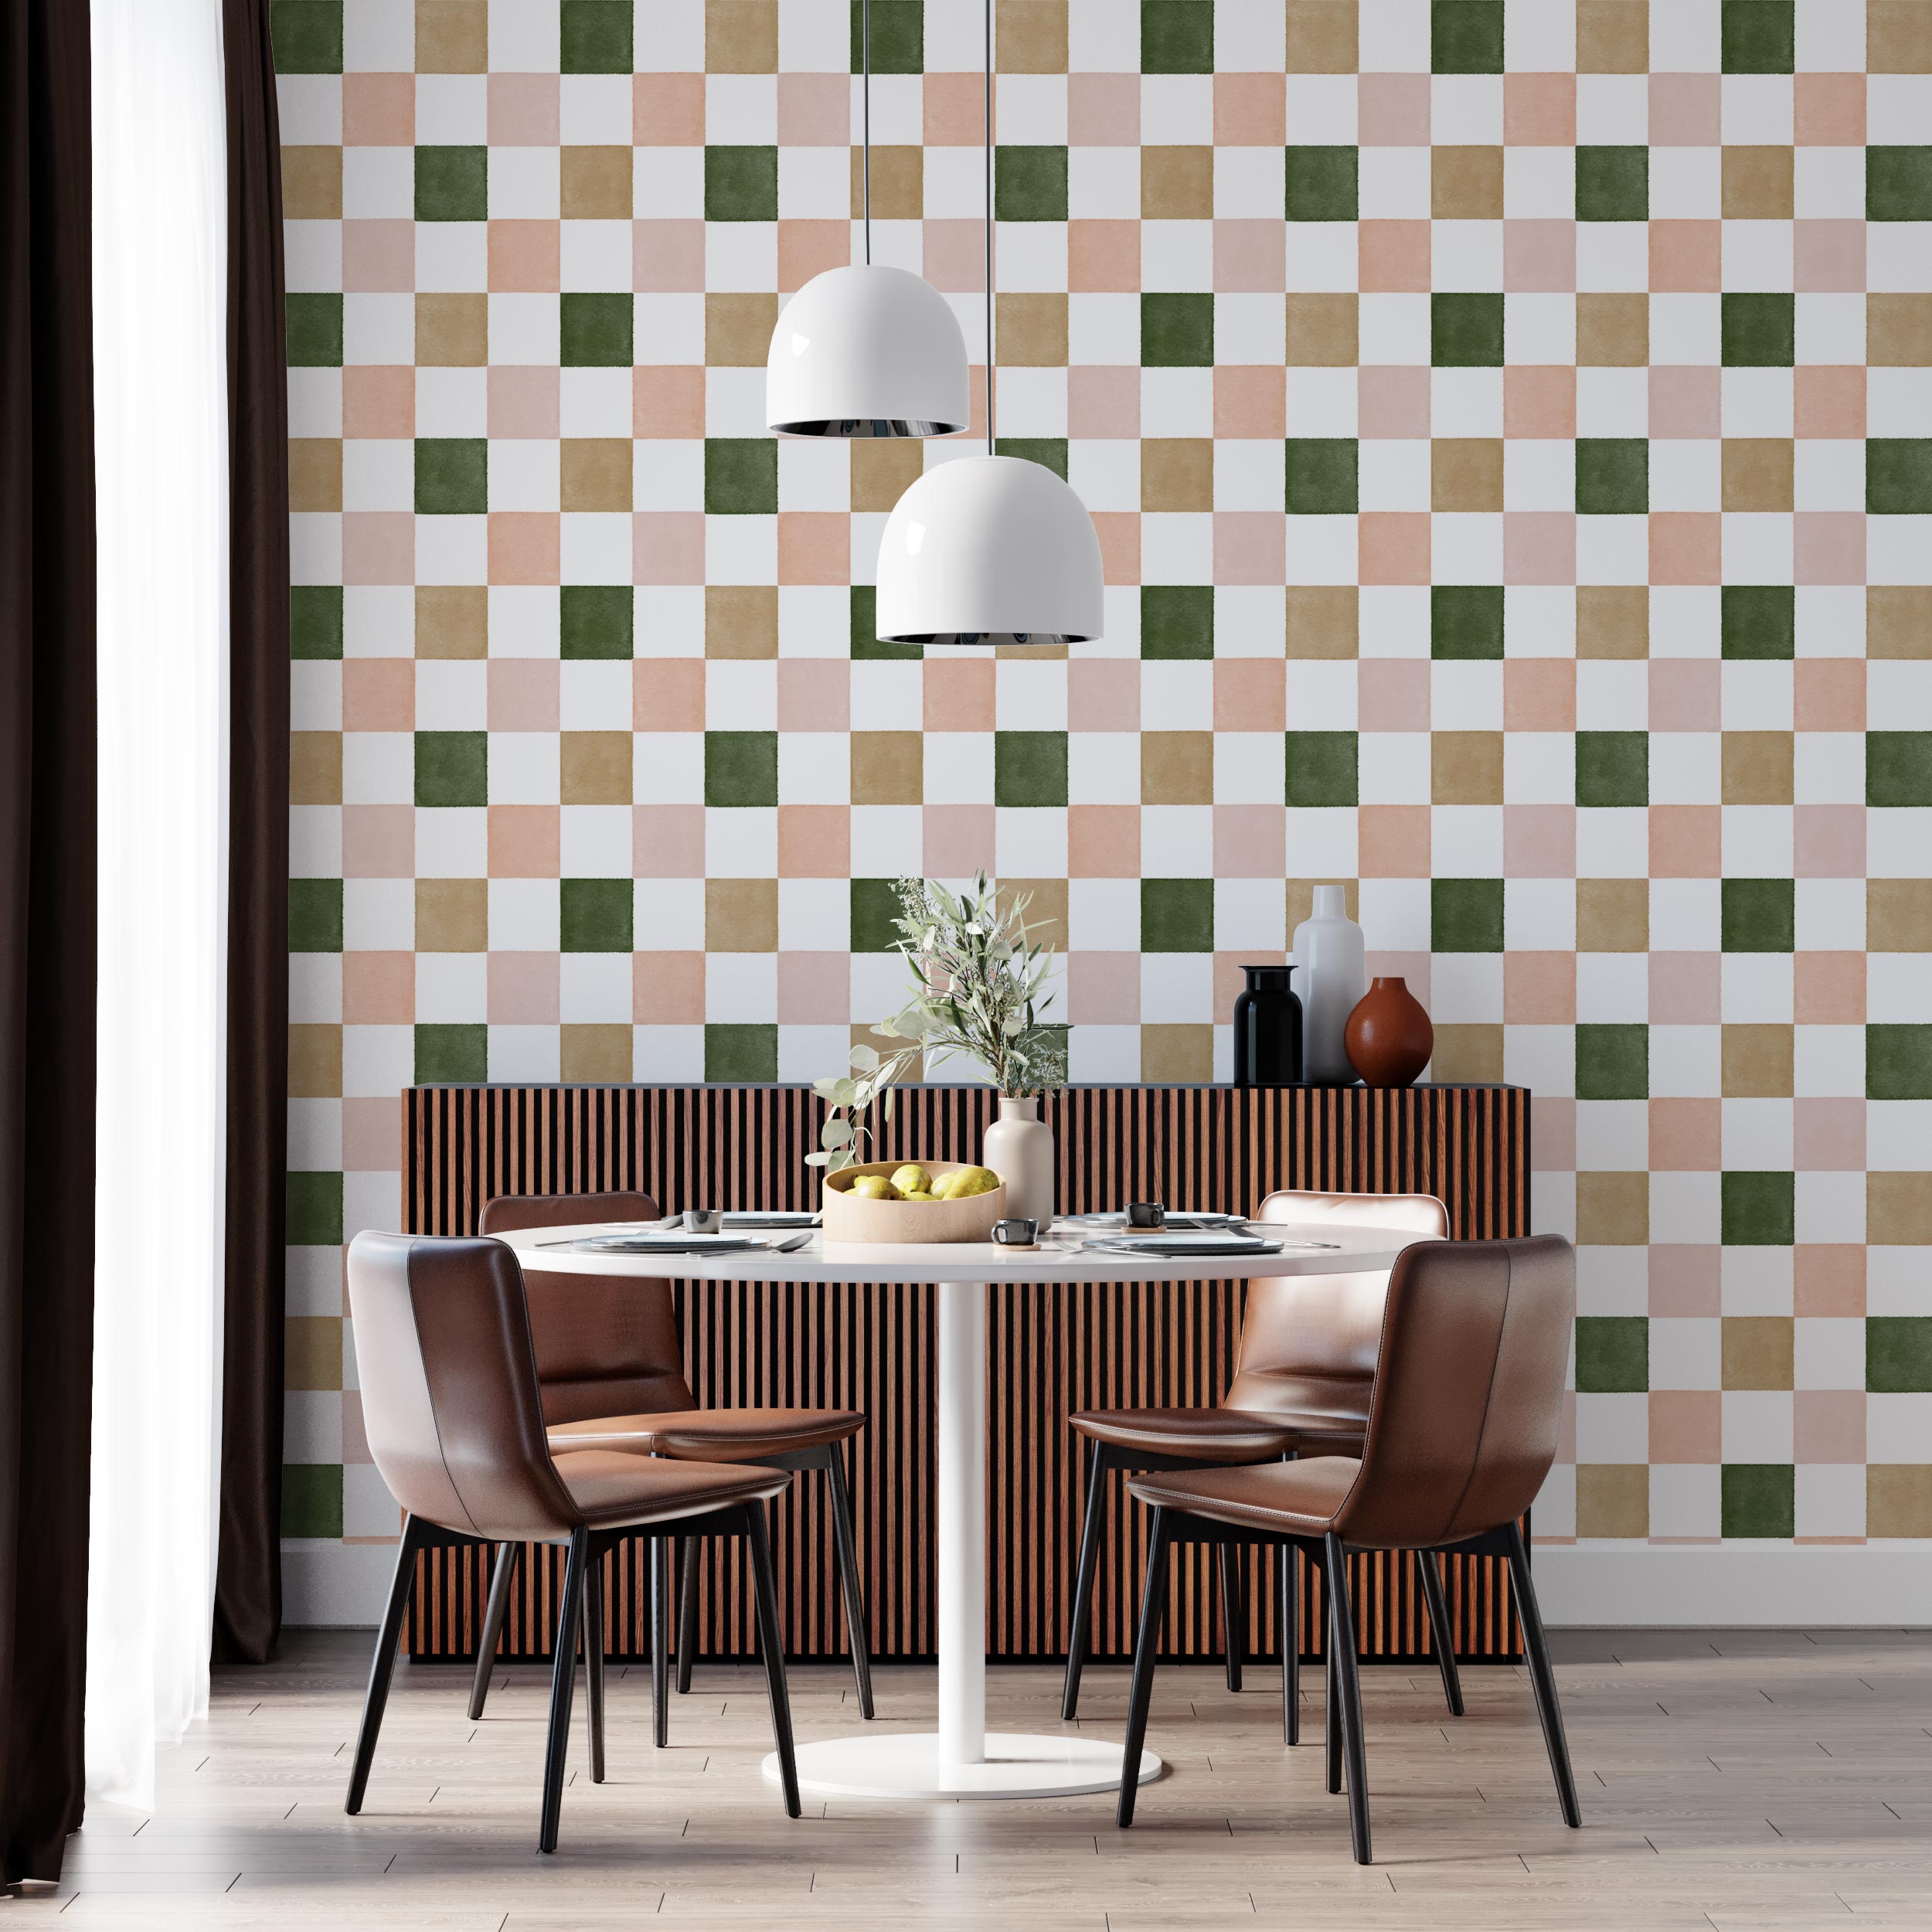 files/A-modern-dining-area-finds-a-unique-focal-point-in-the-retro-checkered-watercolor-peel-and-stick-wallpaper_-complementing-the-brown-console-table_-brown-chairs_-and-round-table.jpg